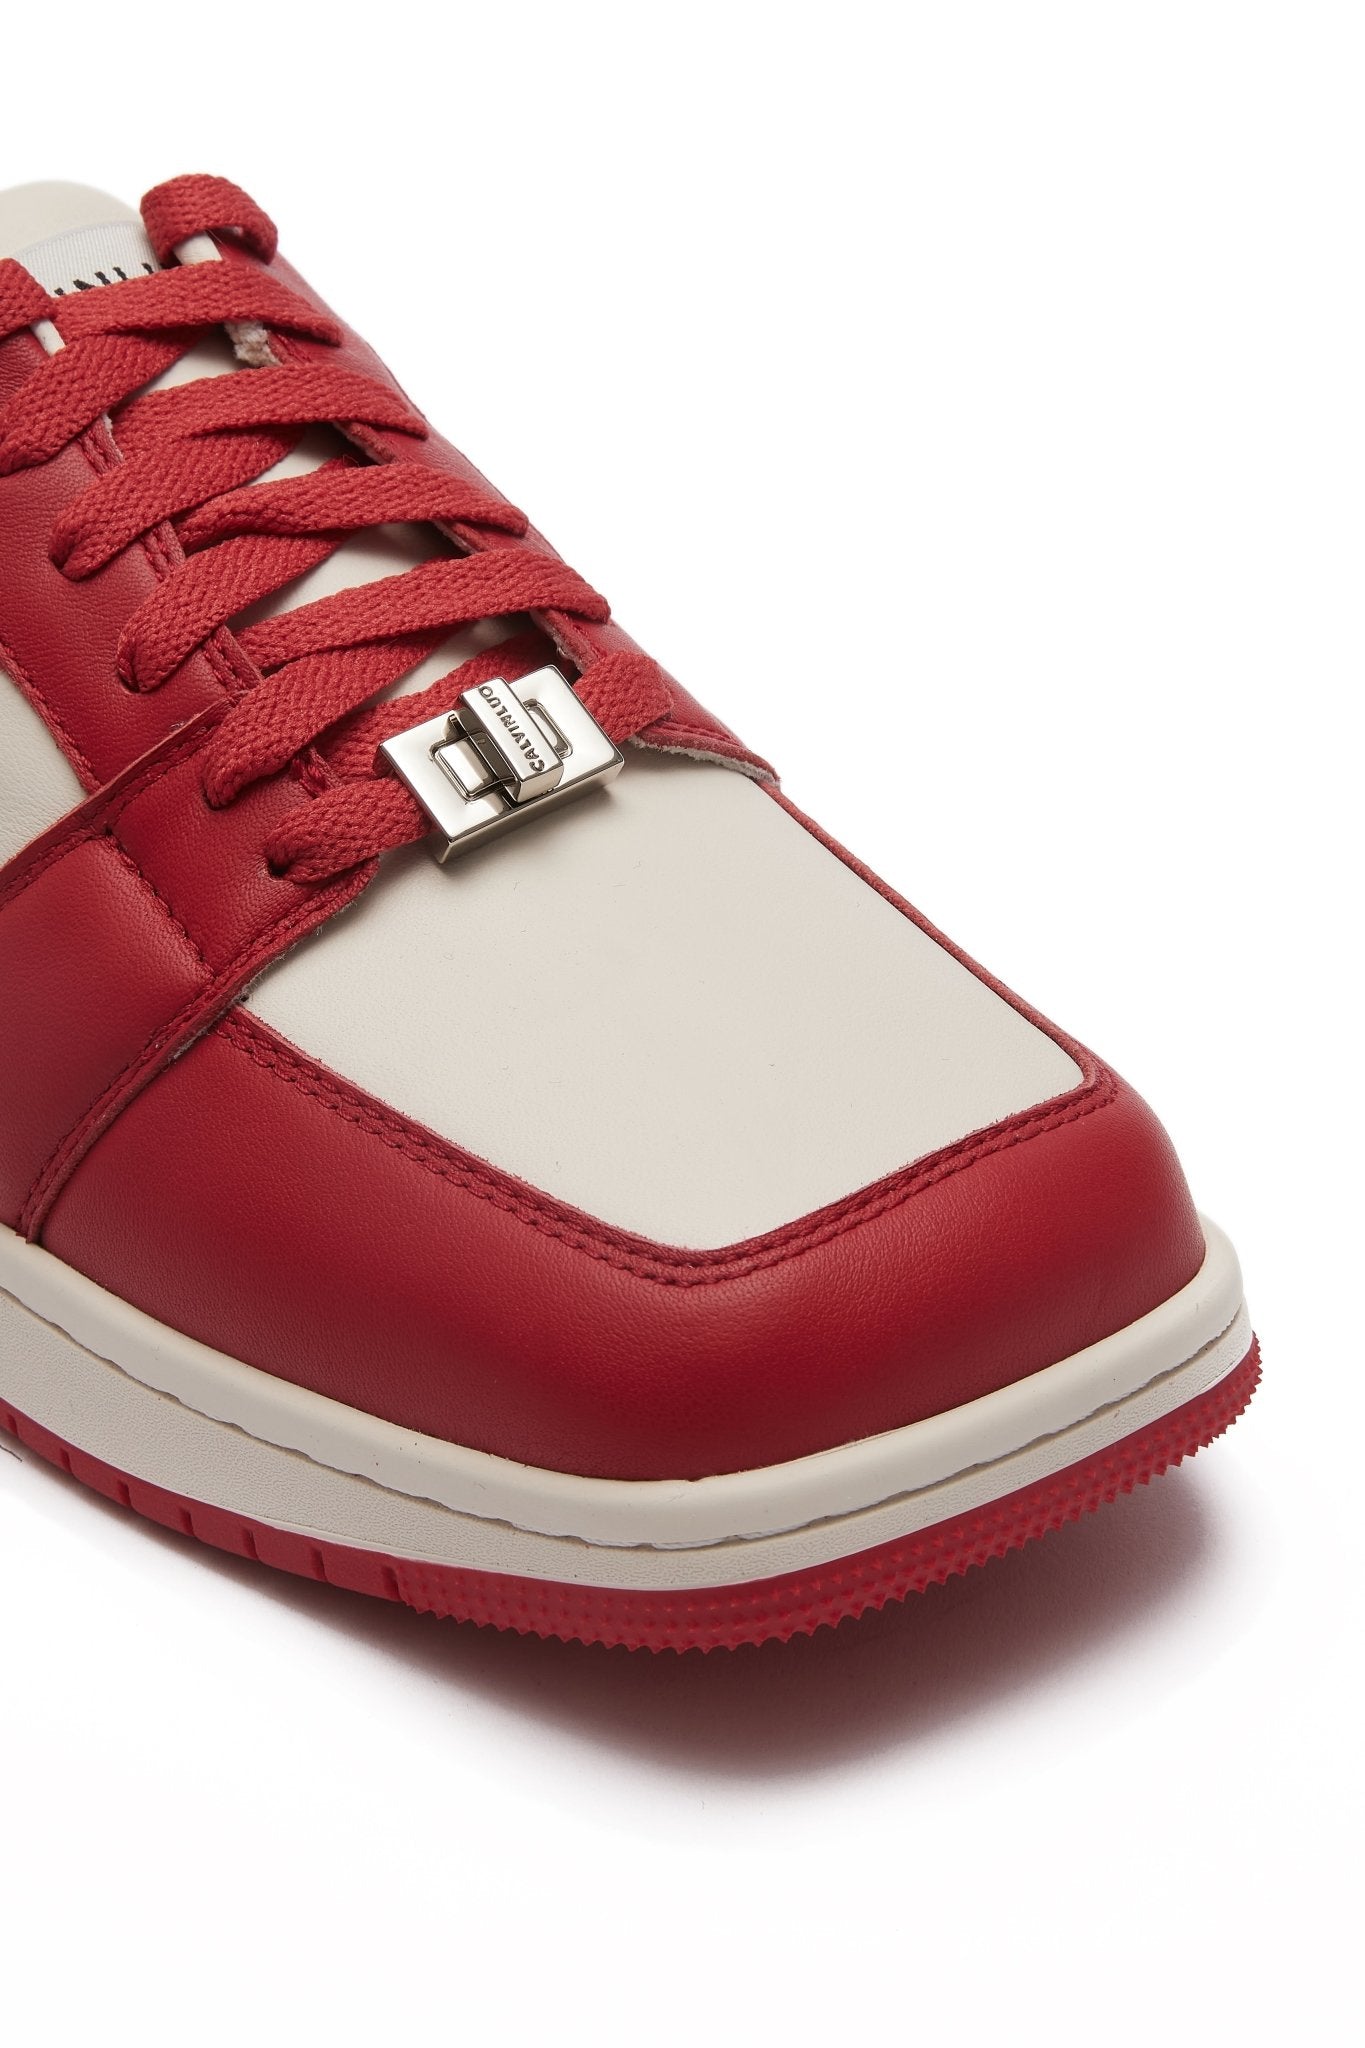 CALVIN LUO Red Square Toe Low Sneakers | MADA IN CHINA